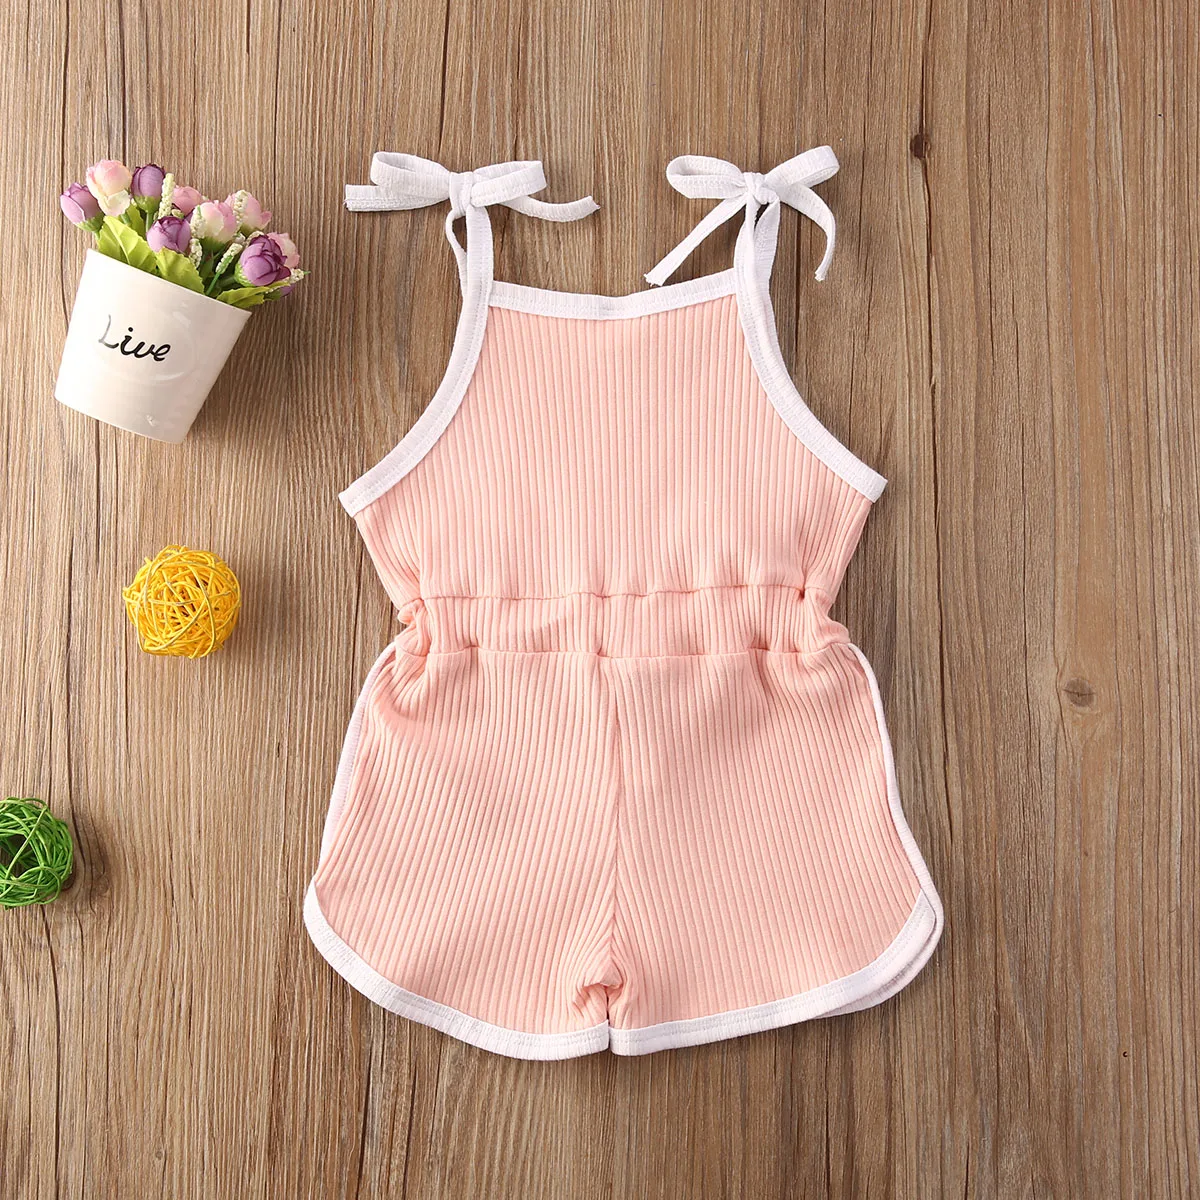 0-5Y Summer Infant Baby Girls Rompers Overalls Solid Sleeveless Belt Jumpsuits Lovely Clothes 4 Colors carters baby bodysuits	